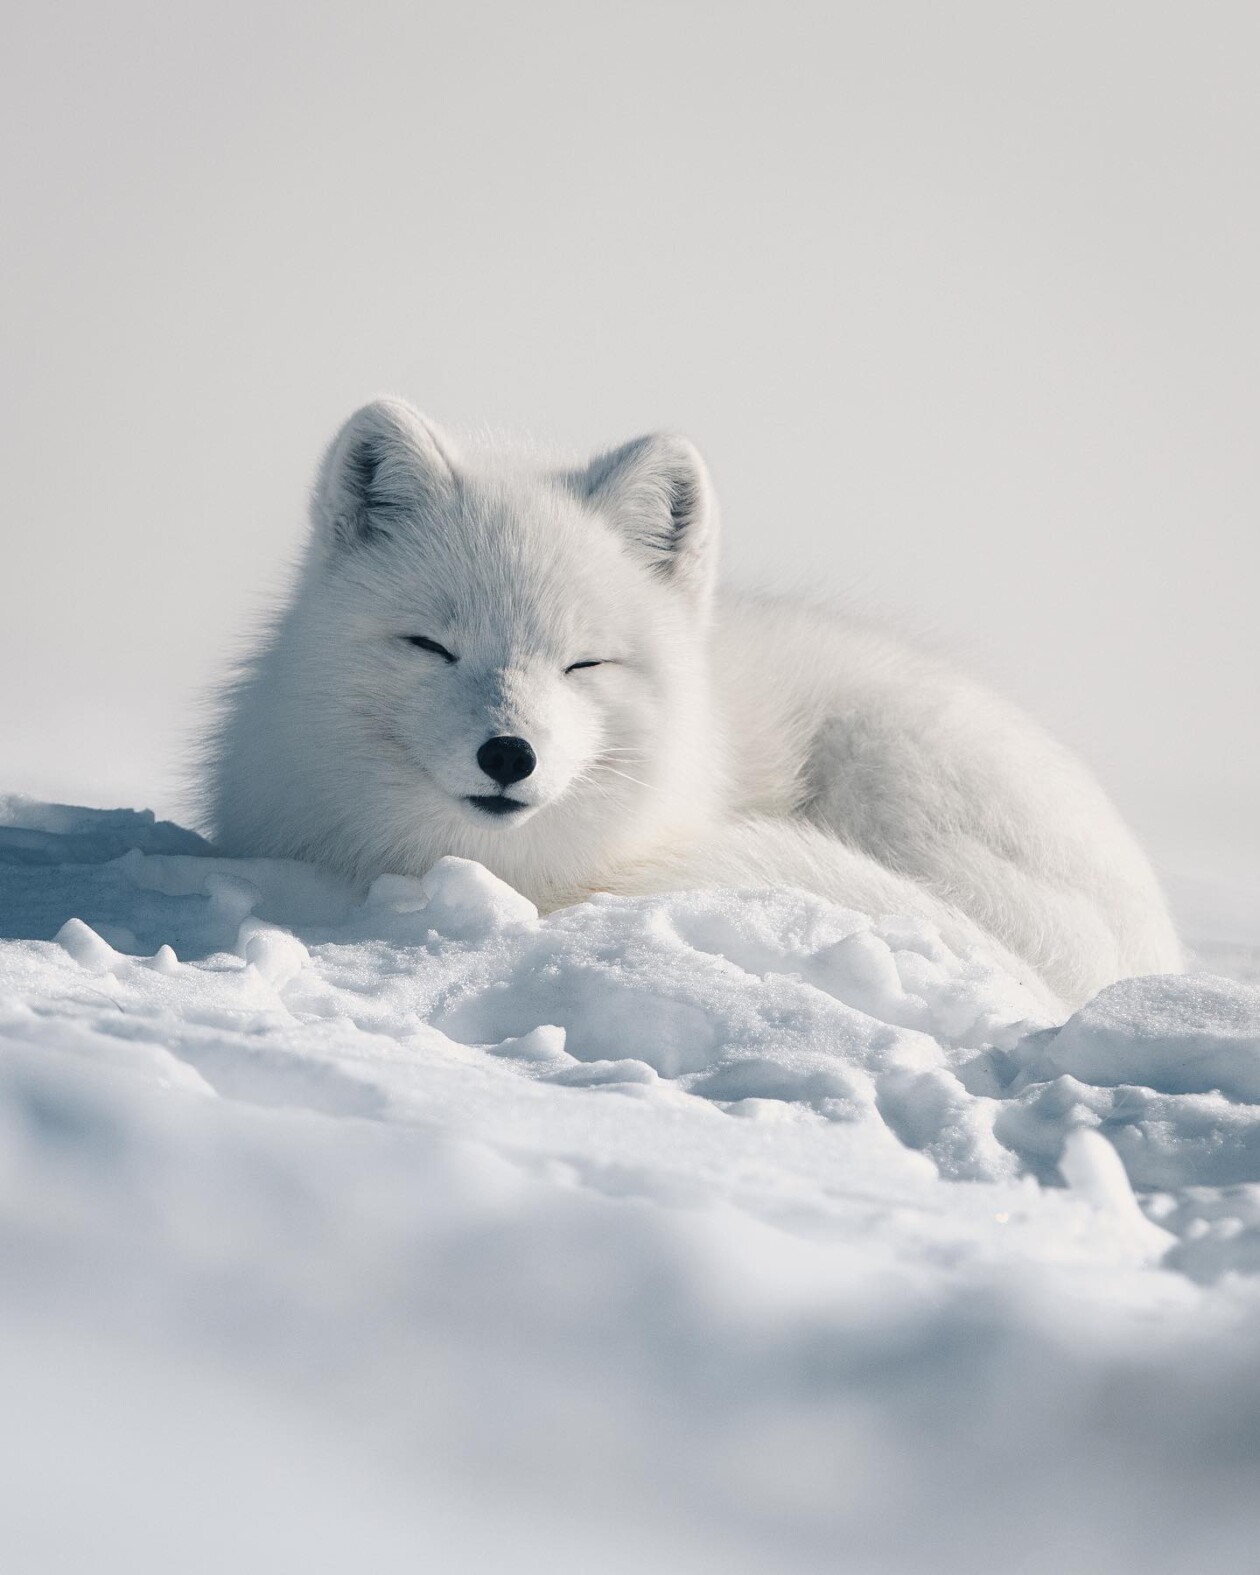 Captivating Pictures Of Arctic Animals By Konsta Punkka (14)